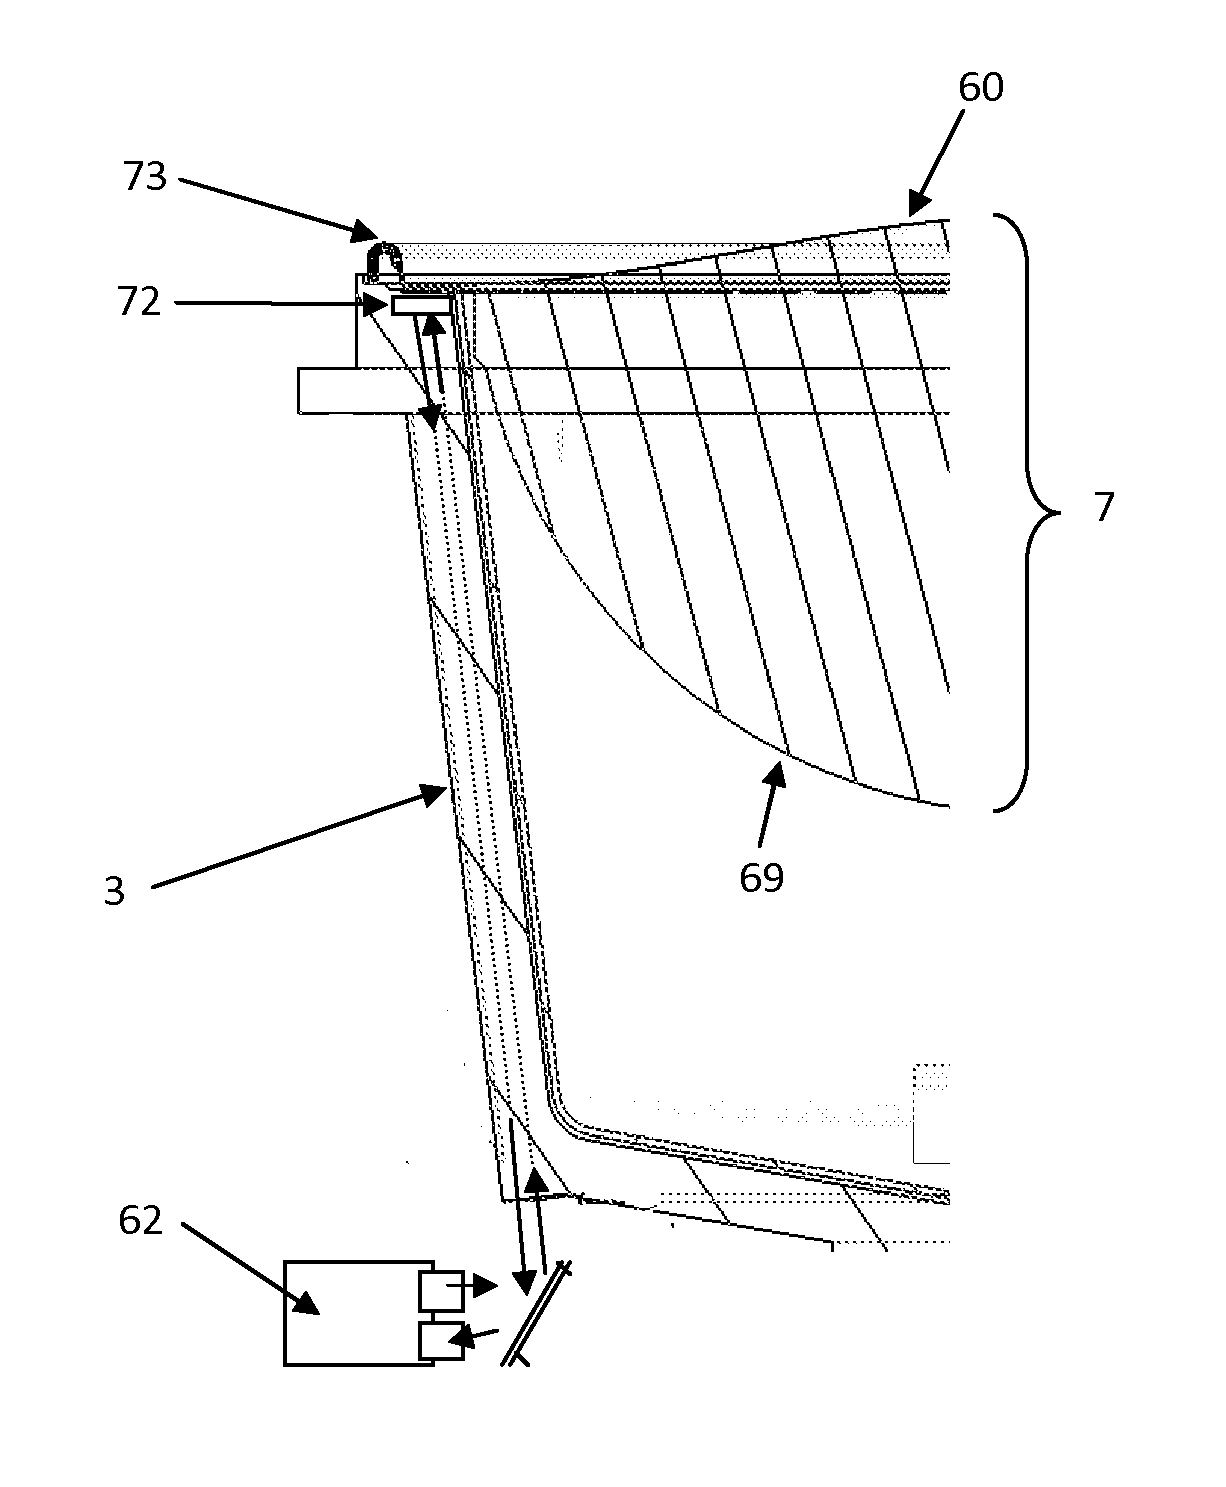 Capsule, system and method for preparing a beverage by centrifugation